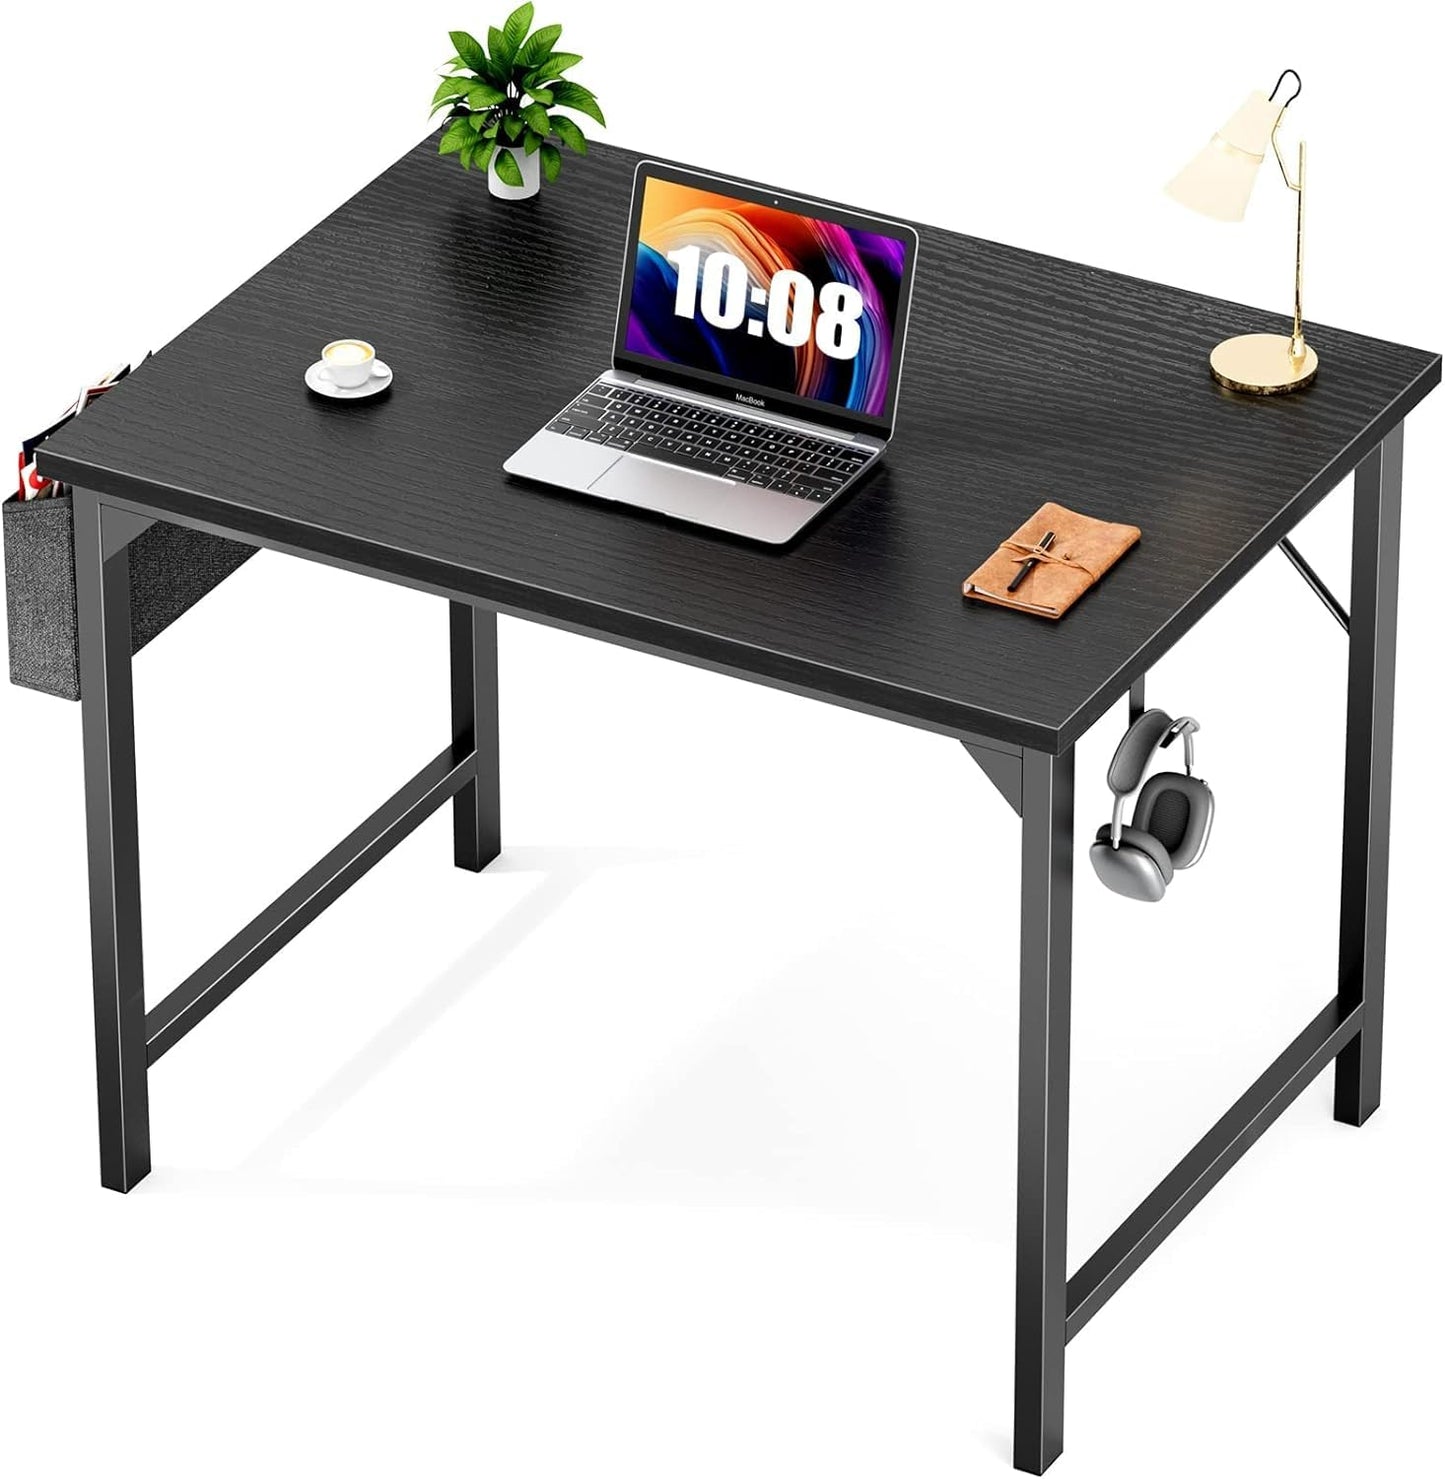 Sweetcrispy Desk- Computer Office Small 32 Inch Writing Study Work Modern Simple Style Wooden Table with Storage Bag & Iron Hook for Home, Bedroom - Black